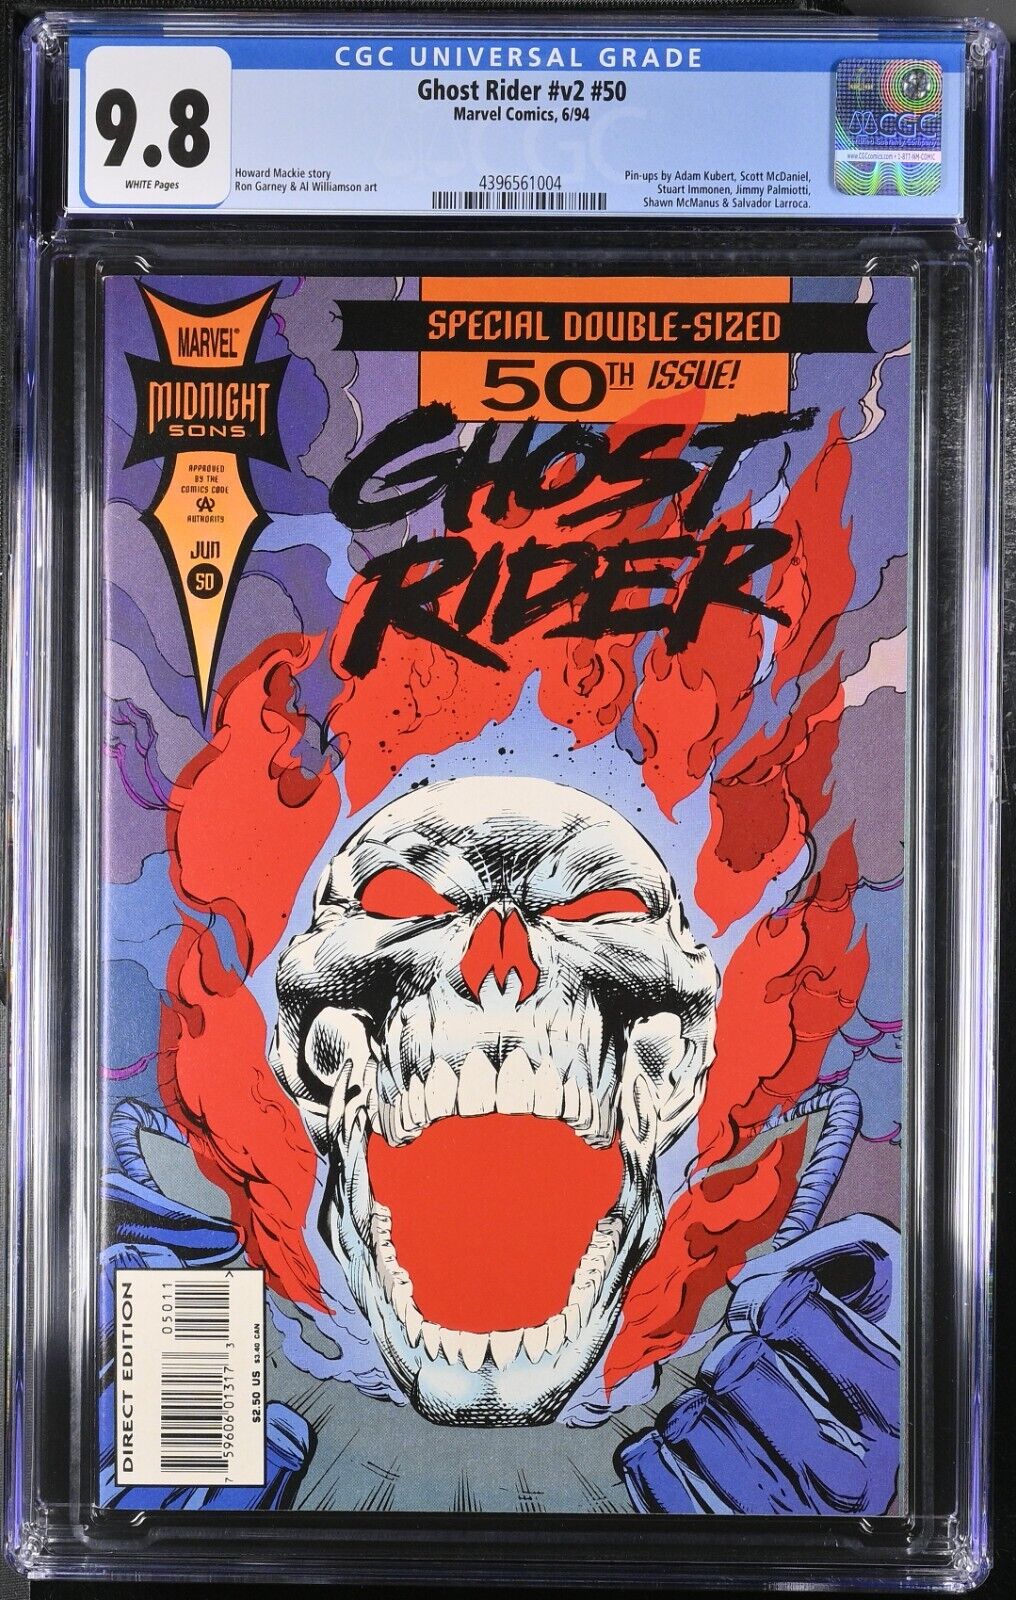 Ghost Rider v2 #50 CGC 9.8 NM/MT - White Pages Marvel Comics